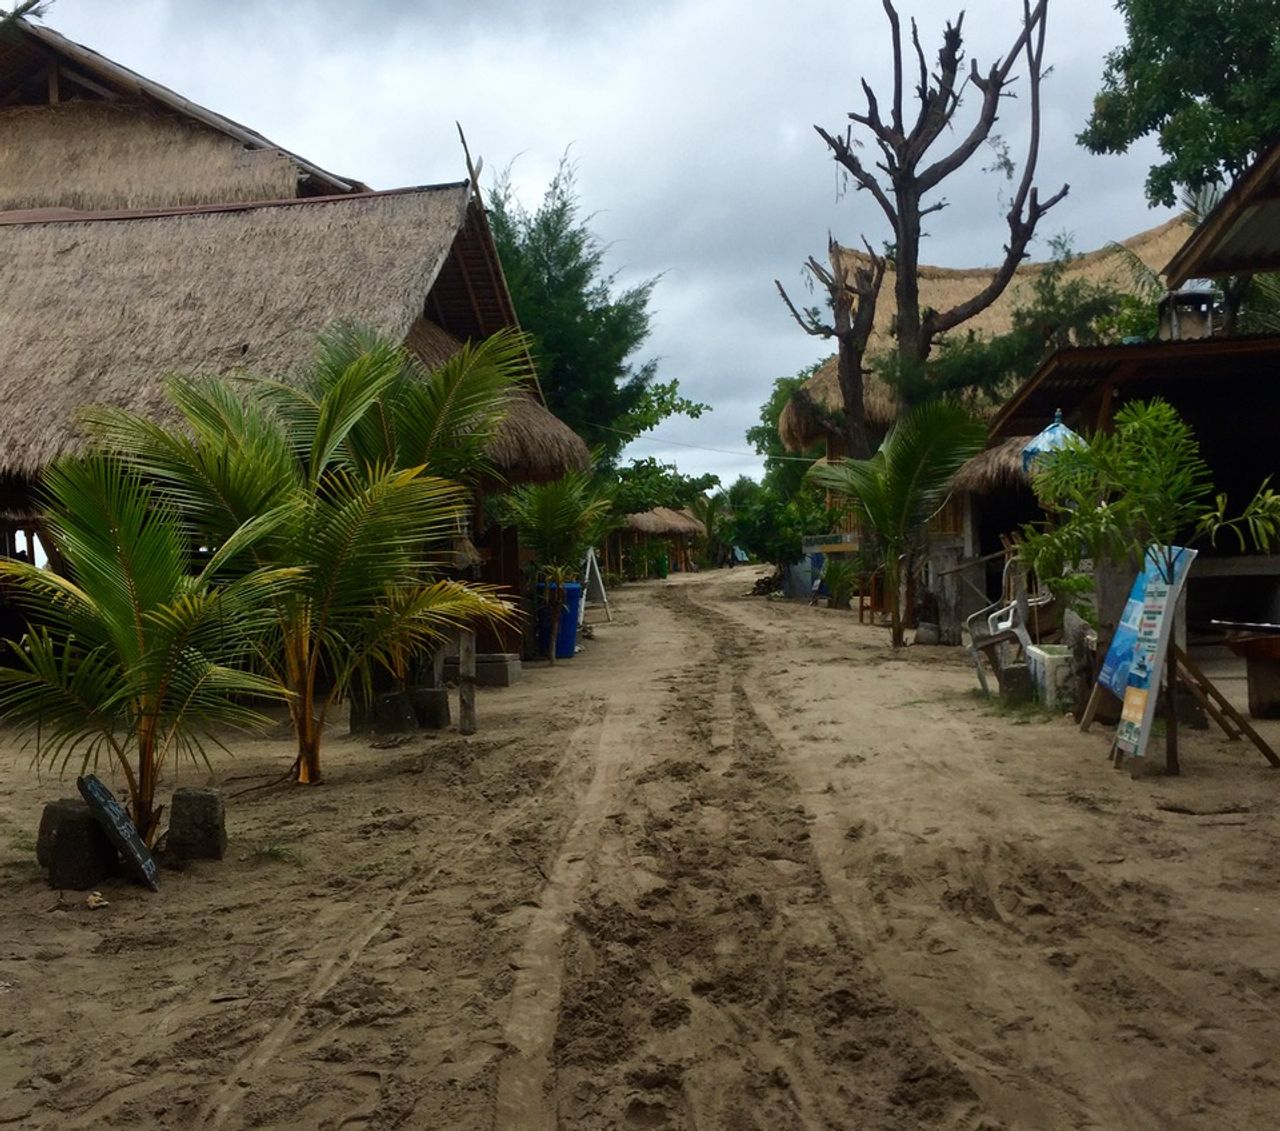 A sand road with bars and restaurants on both sides.